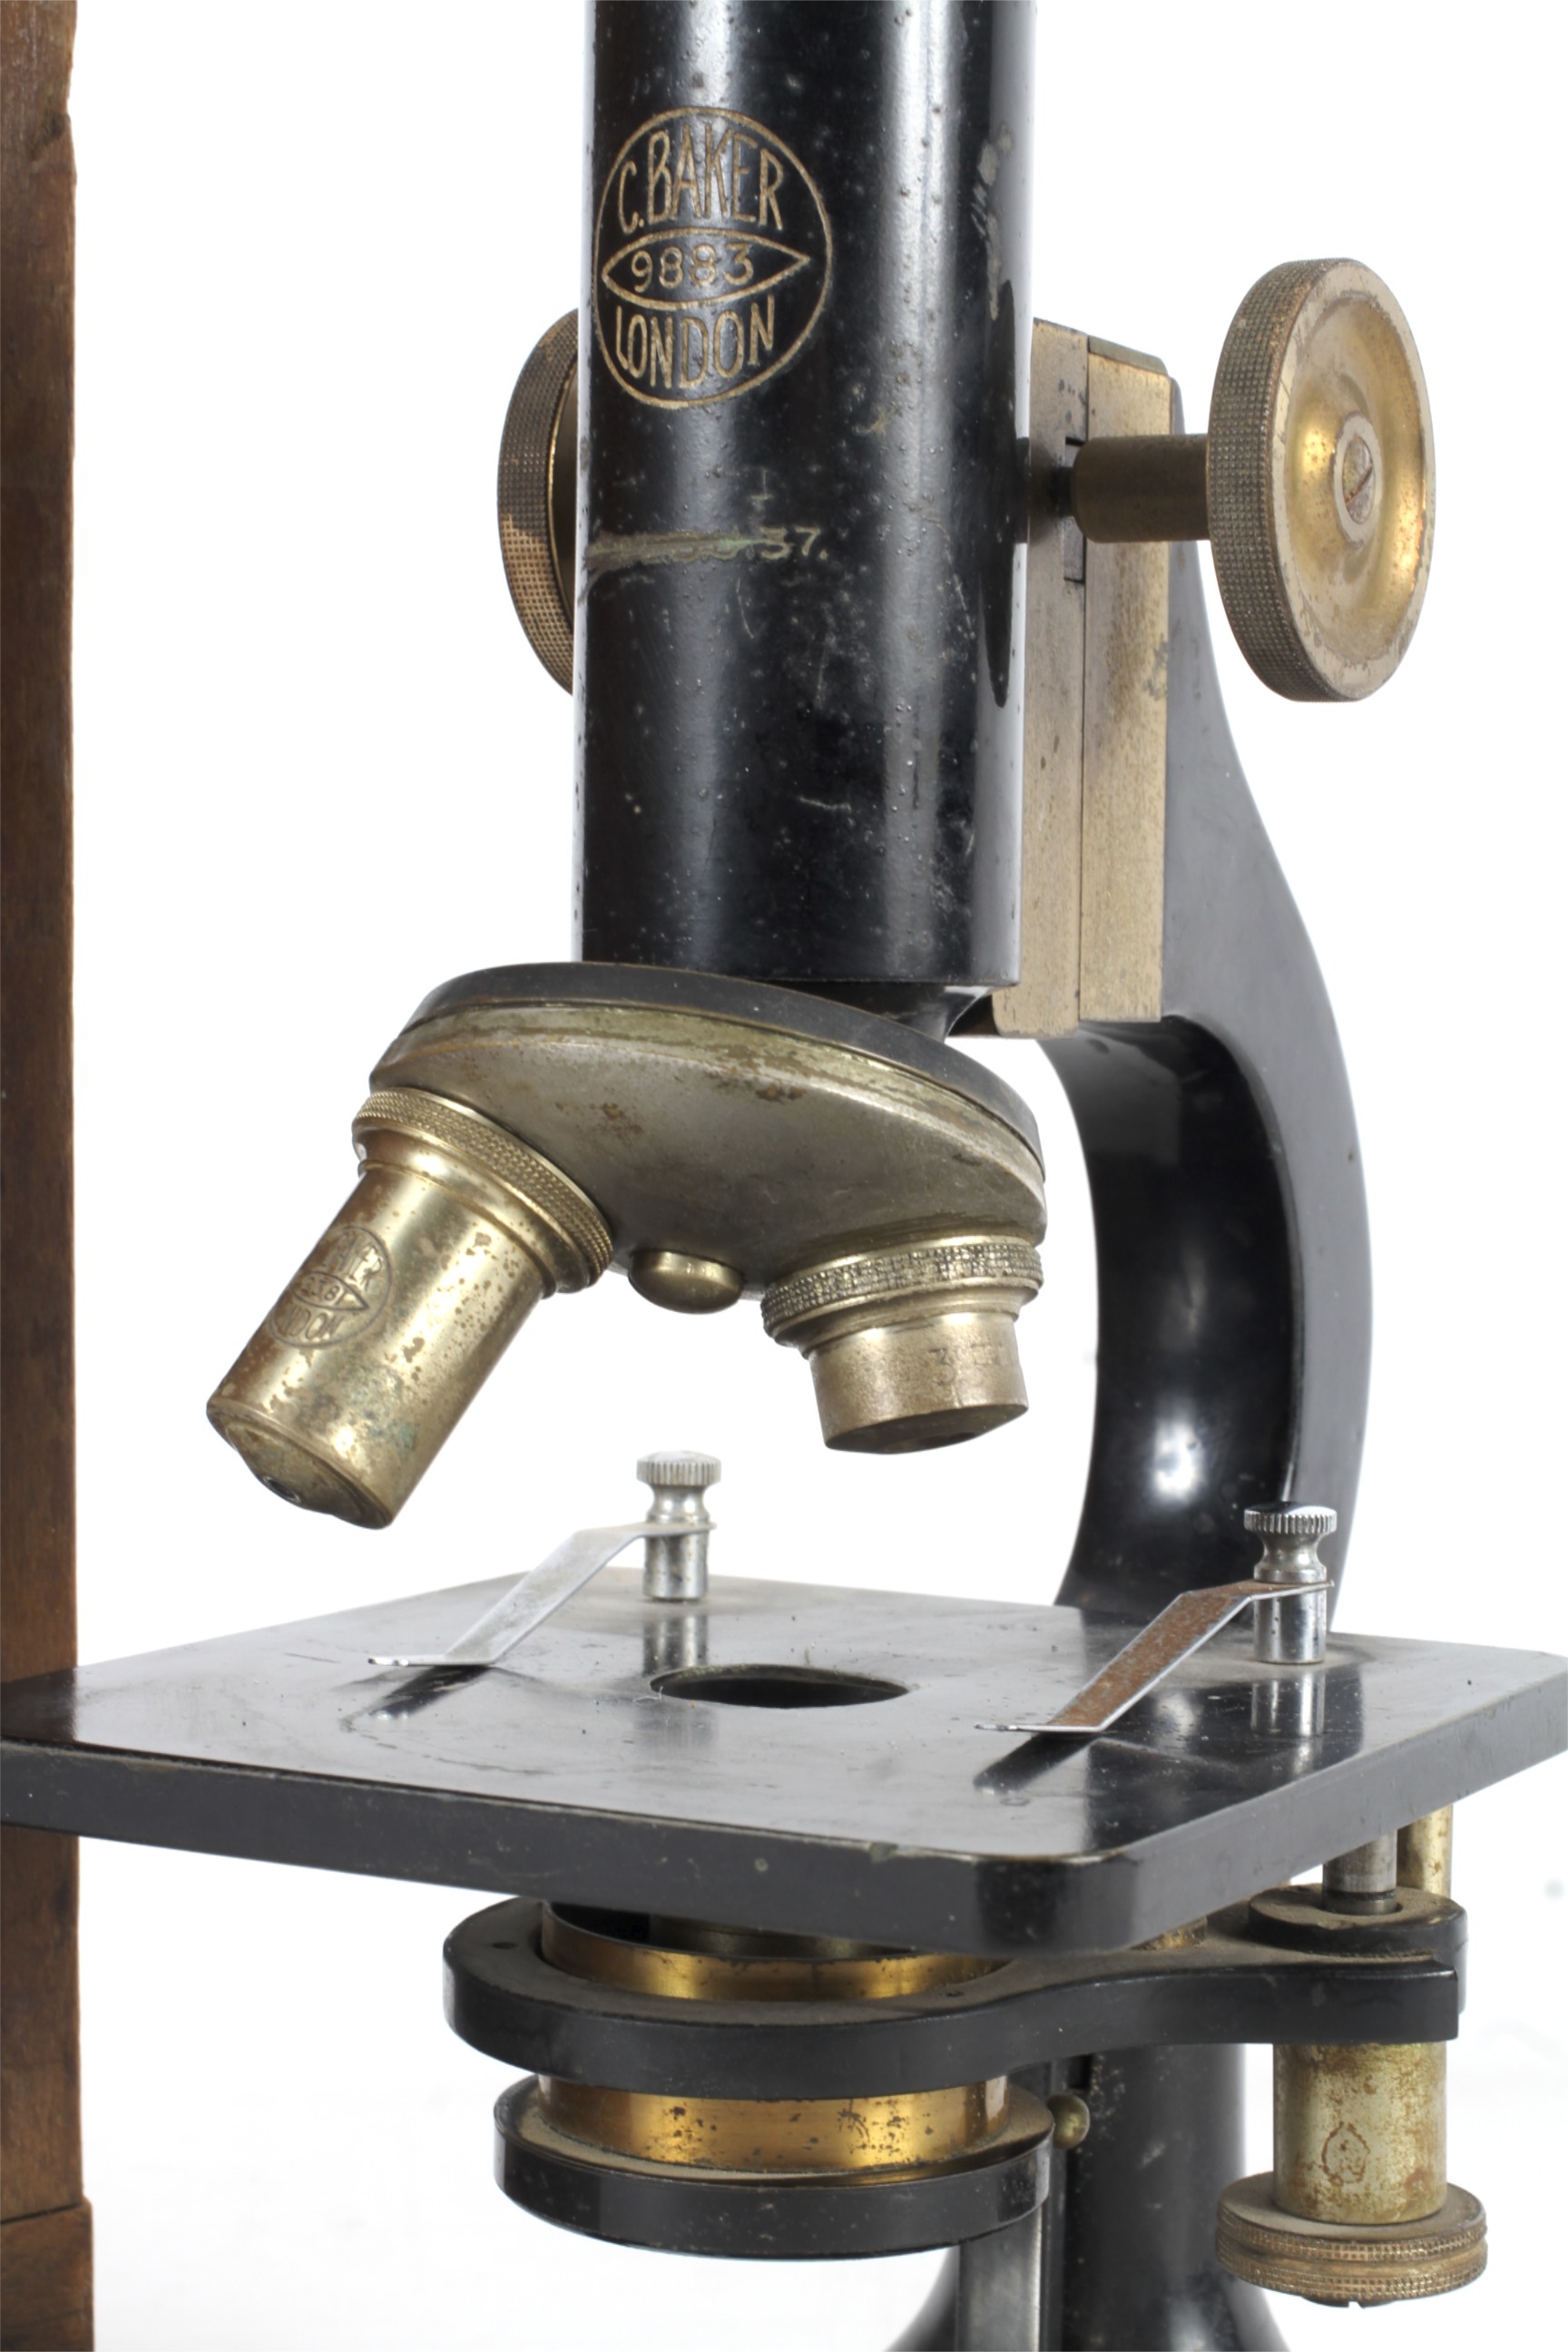 A mid-20th century C Baker London 9883 compound monocular microscope. - Image 2 of 3